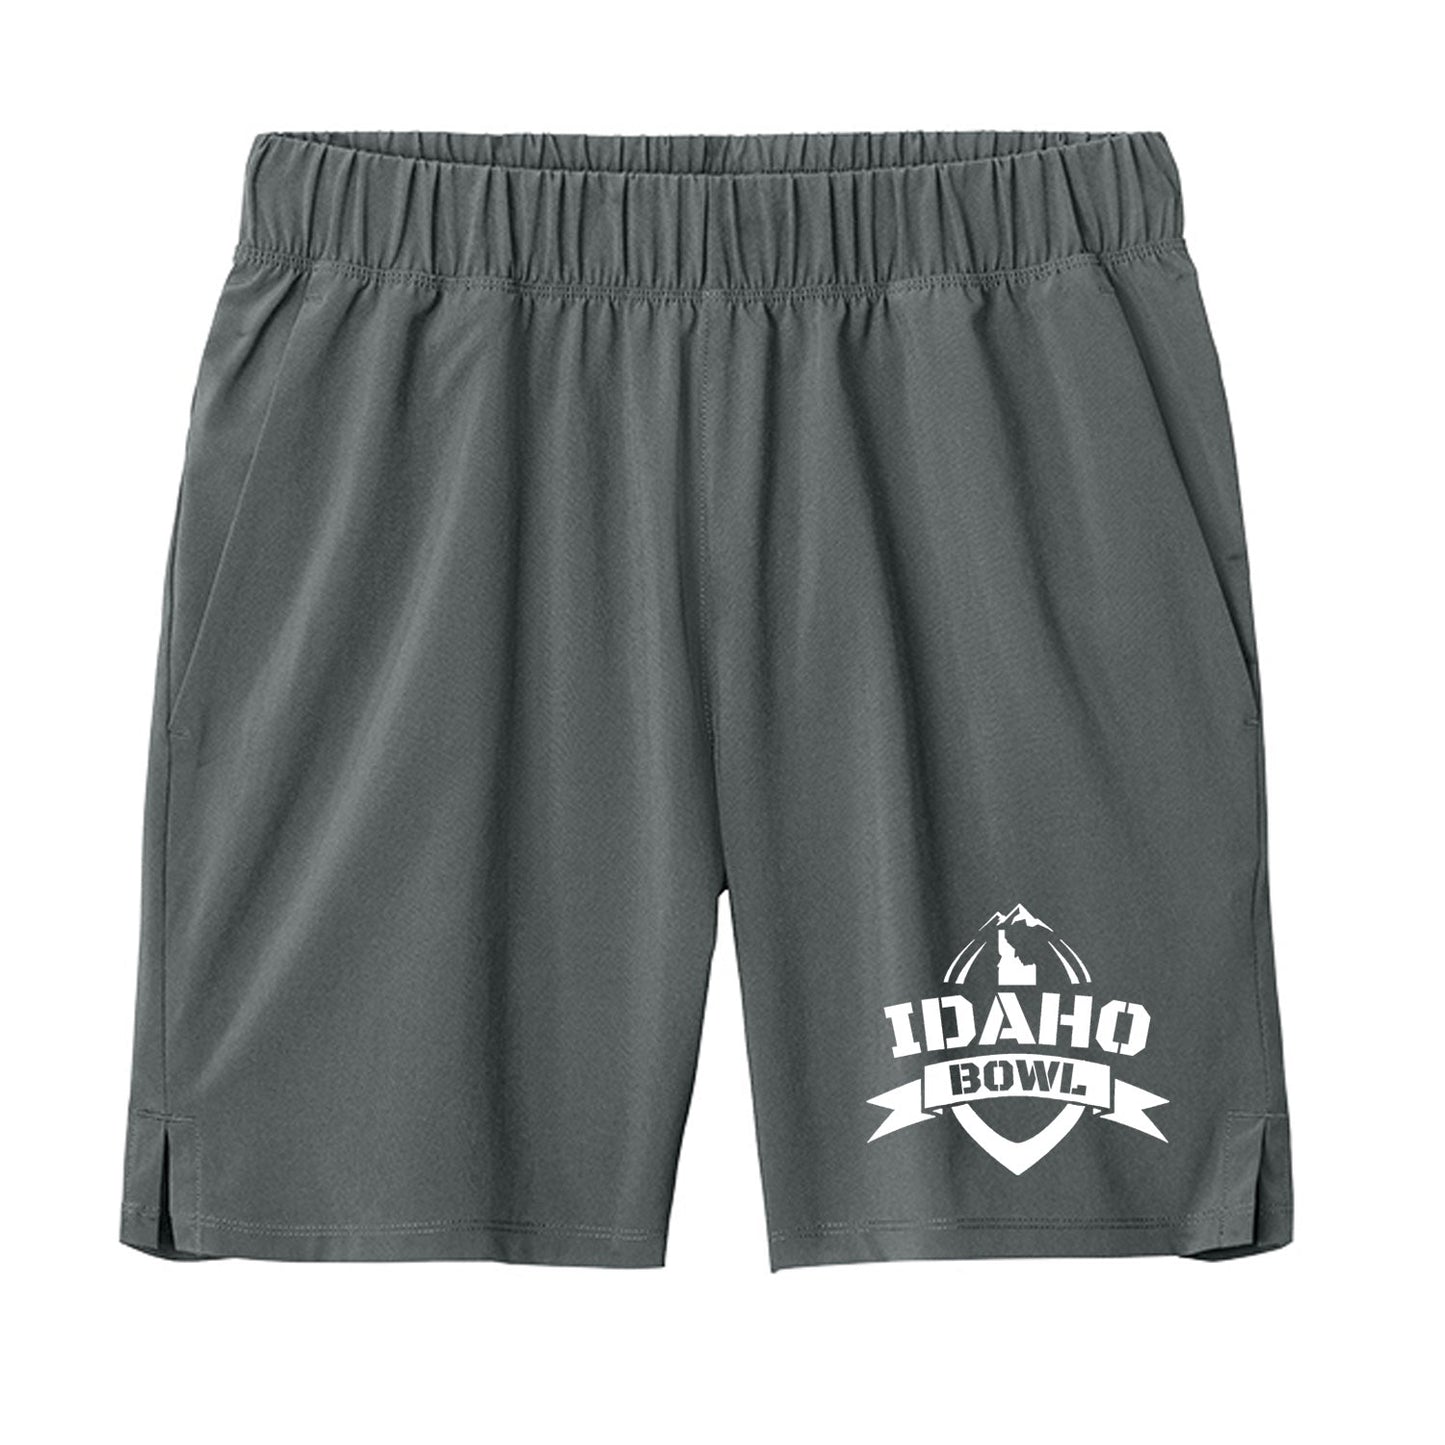 Idaho Bowl - YOUTH Polyester Short - 2 colors available